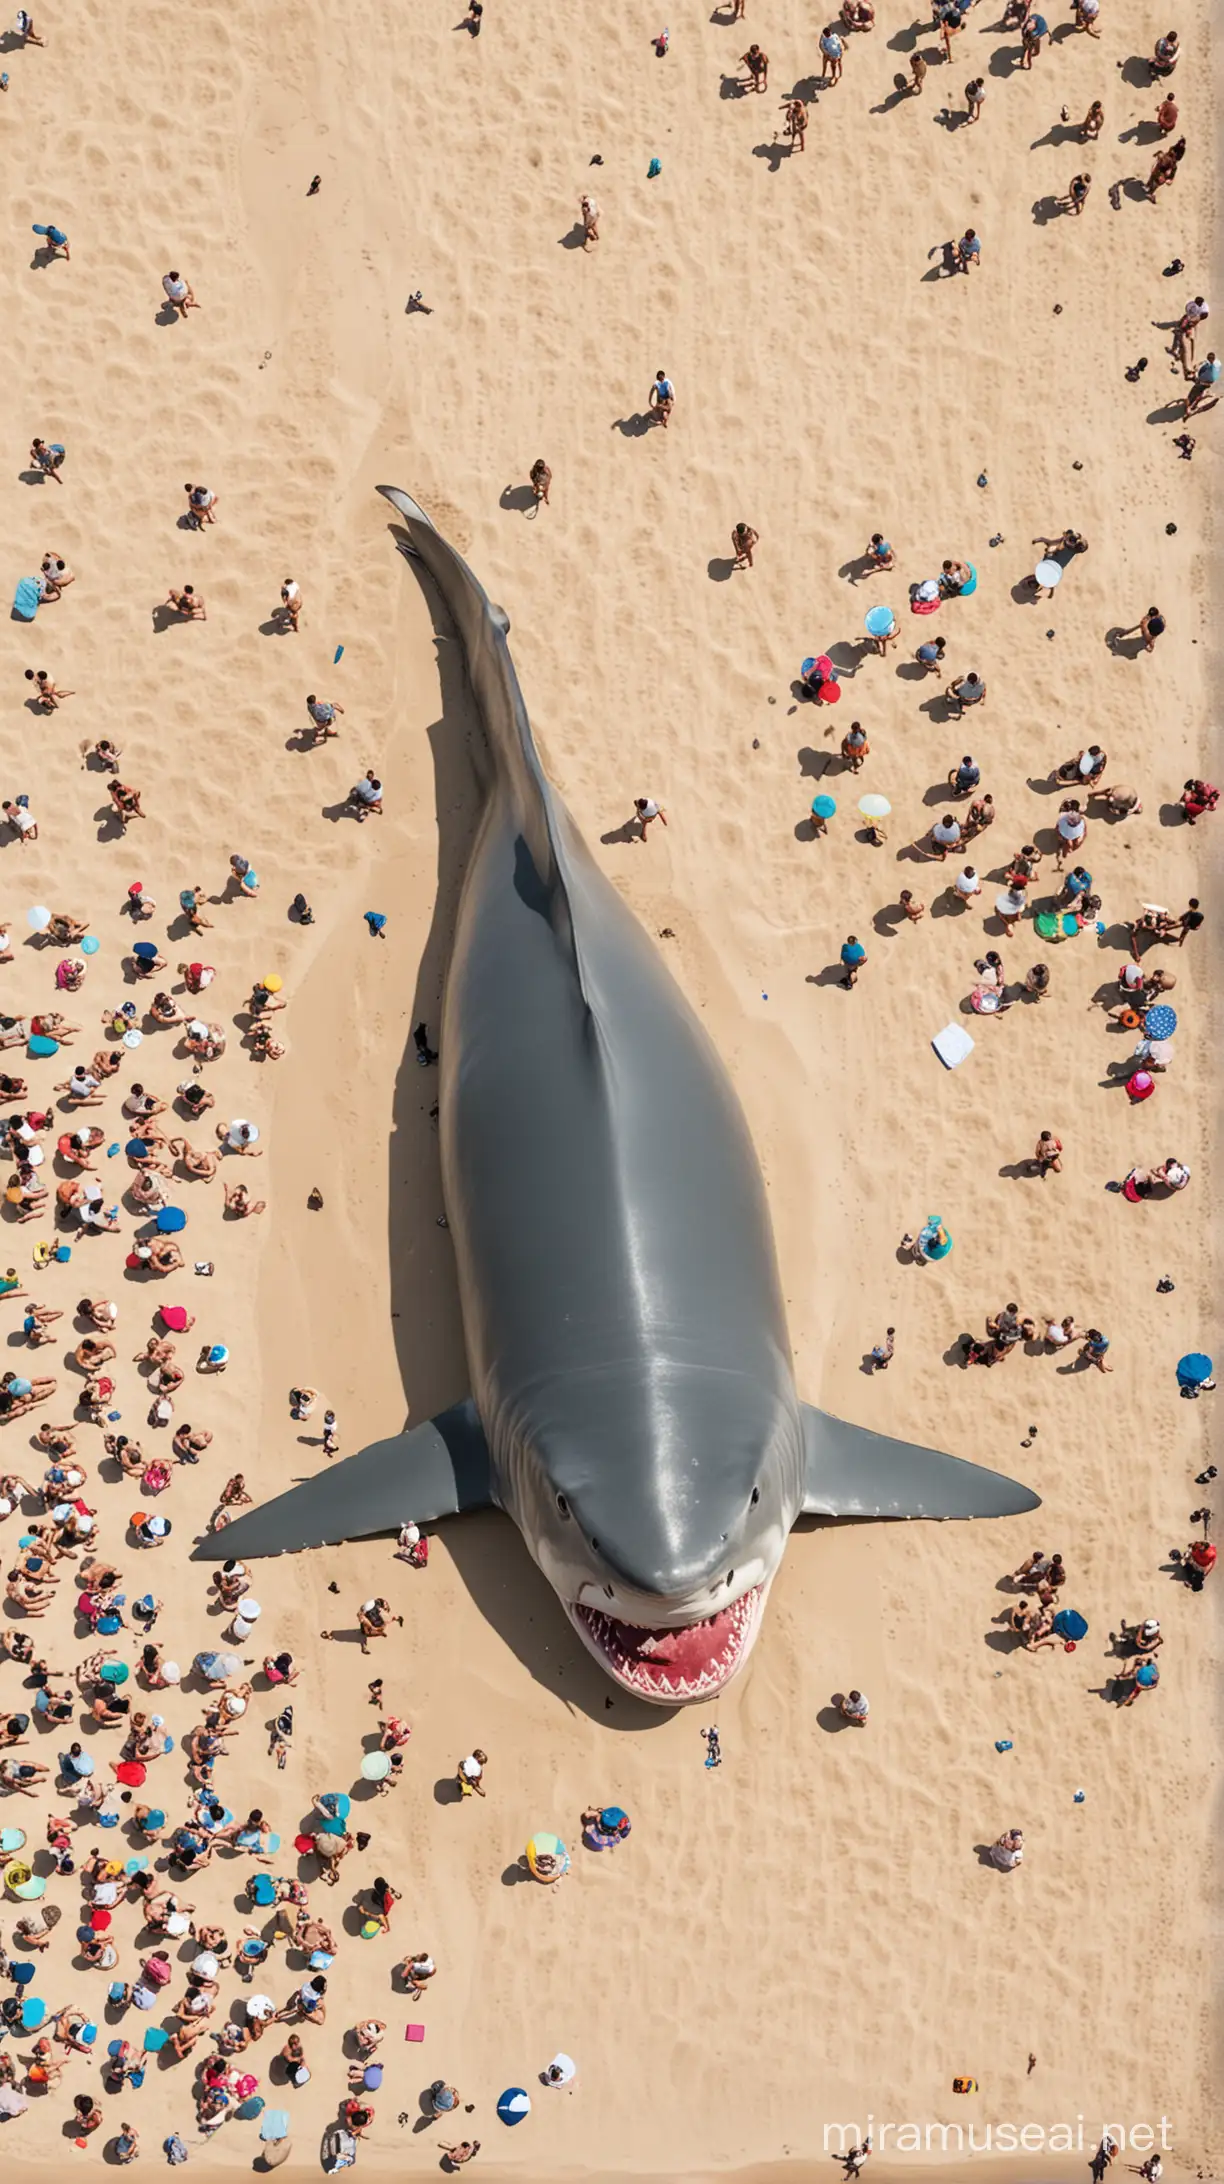 Stranded Shark on Beach with Curious Onlookers